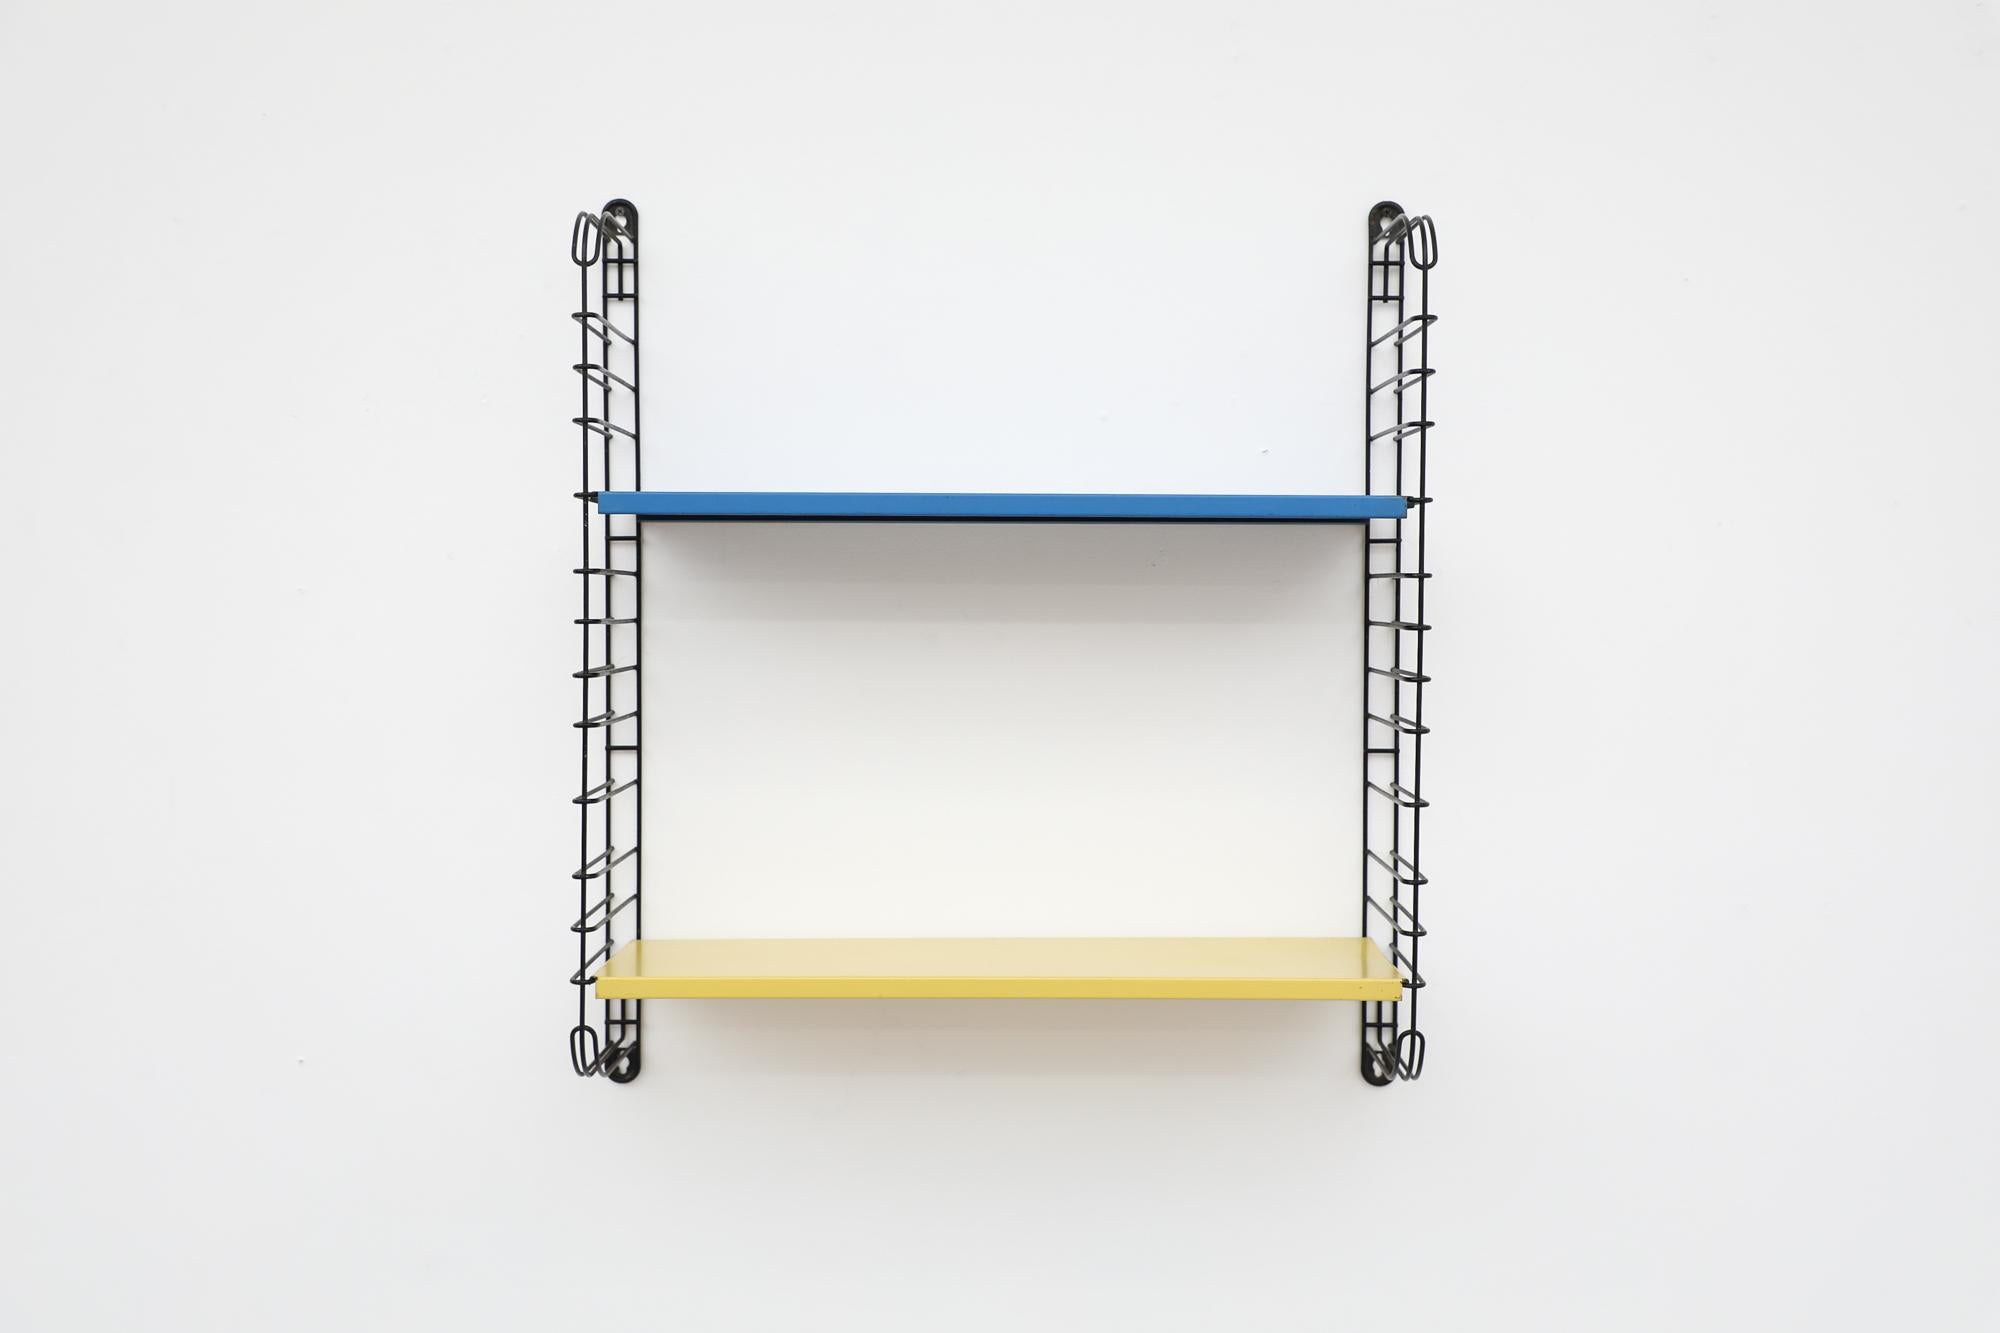 Midcentury Tomado Industrial shelving with blue and yellow shelves on black enameled metal wire risers. Designed by Jan Van Der Togt. The shelves rest on the wire risers and can be arranged to different positions. In original condition with visible